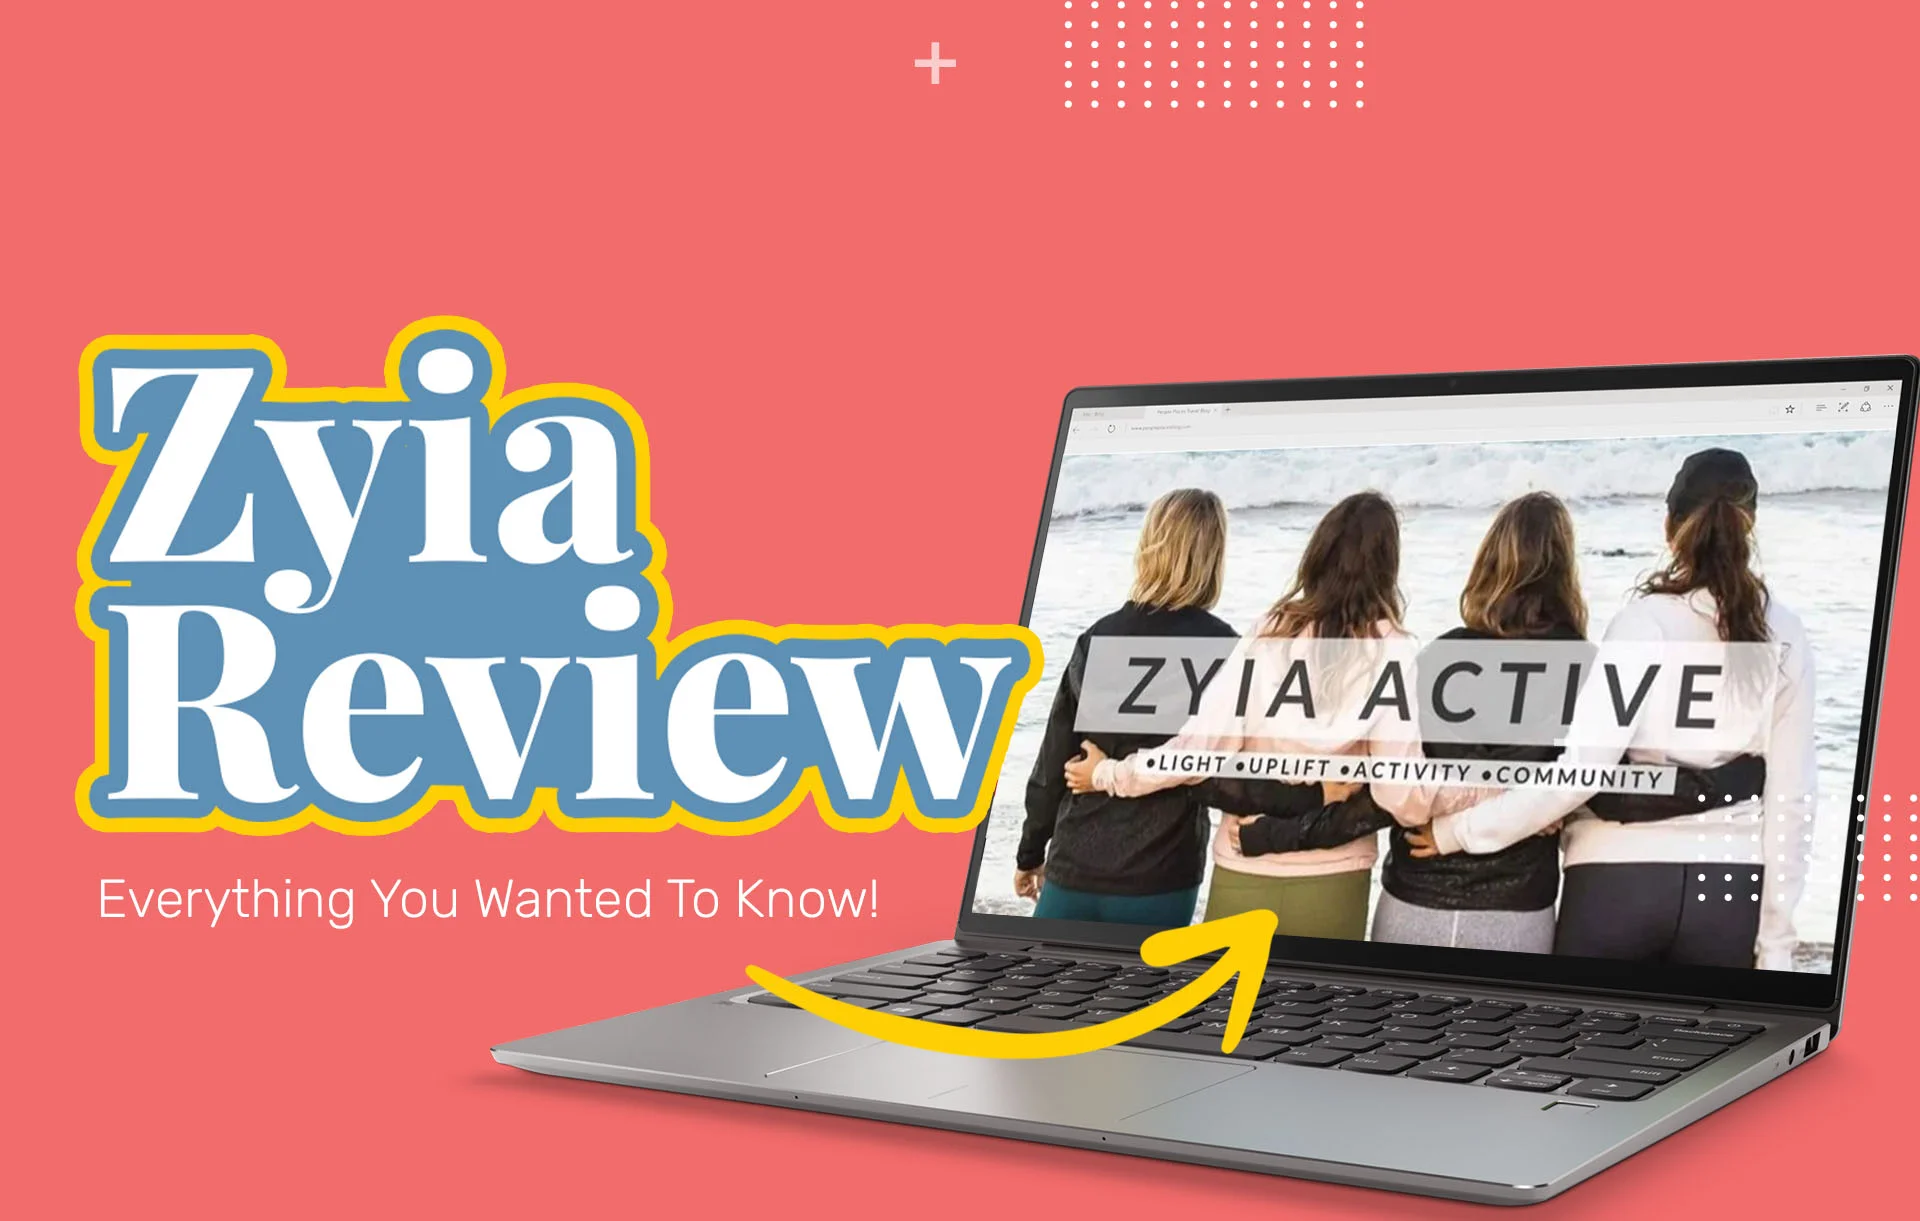 Zyia Reviews: Everything You Wanted To Know!